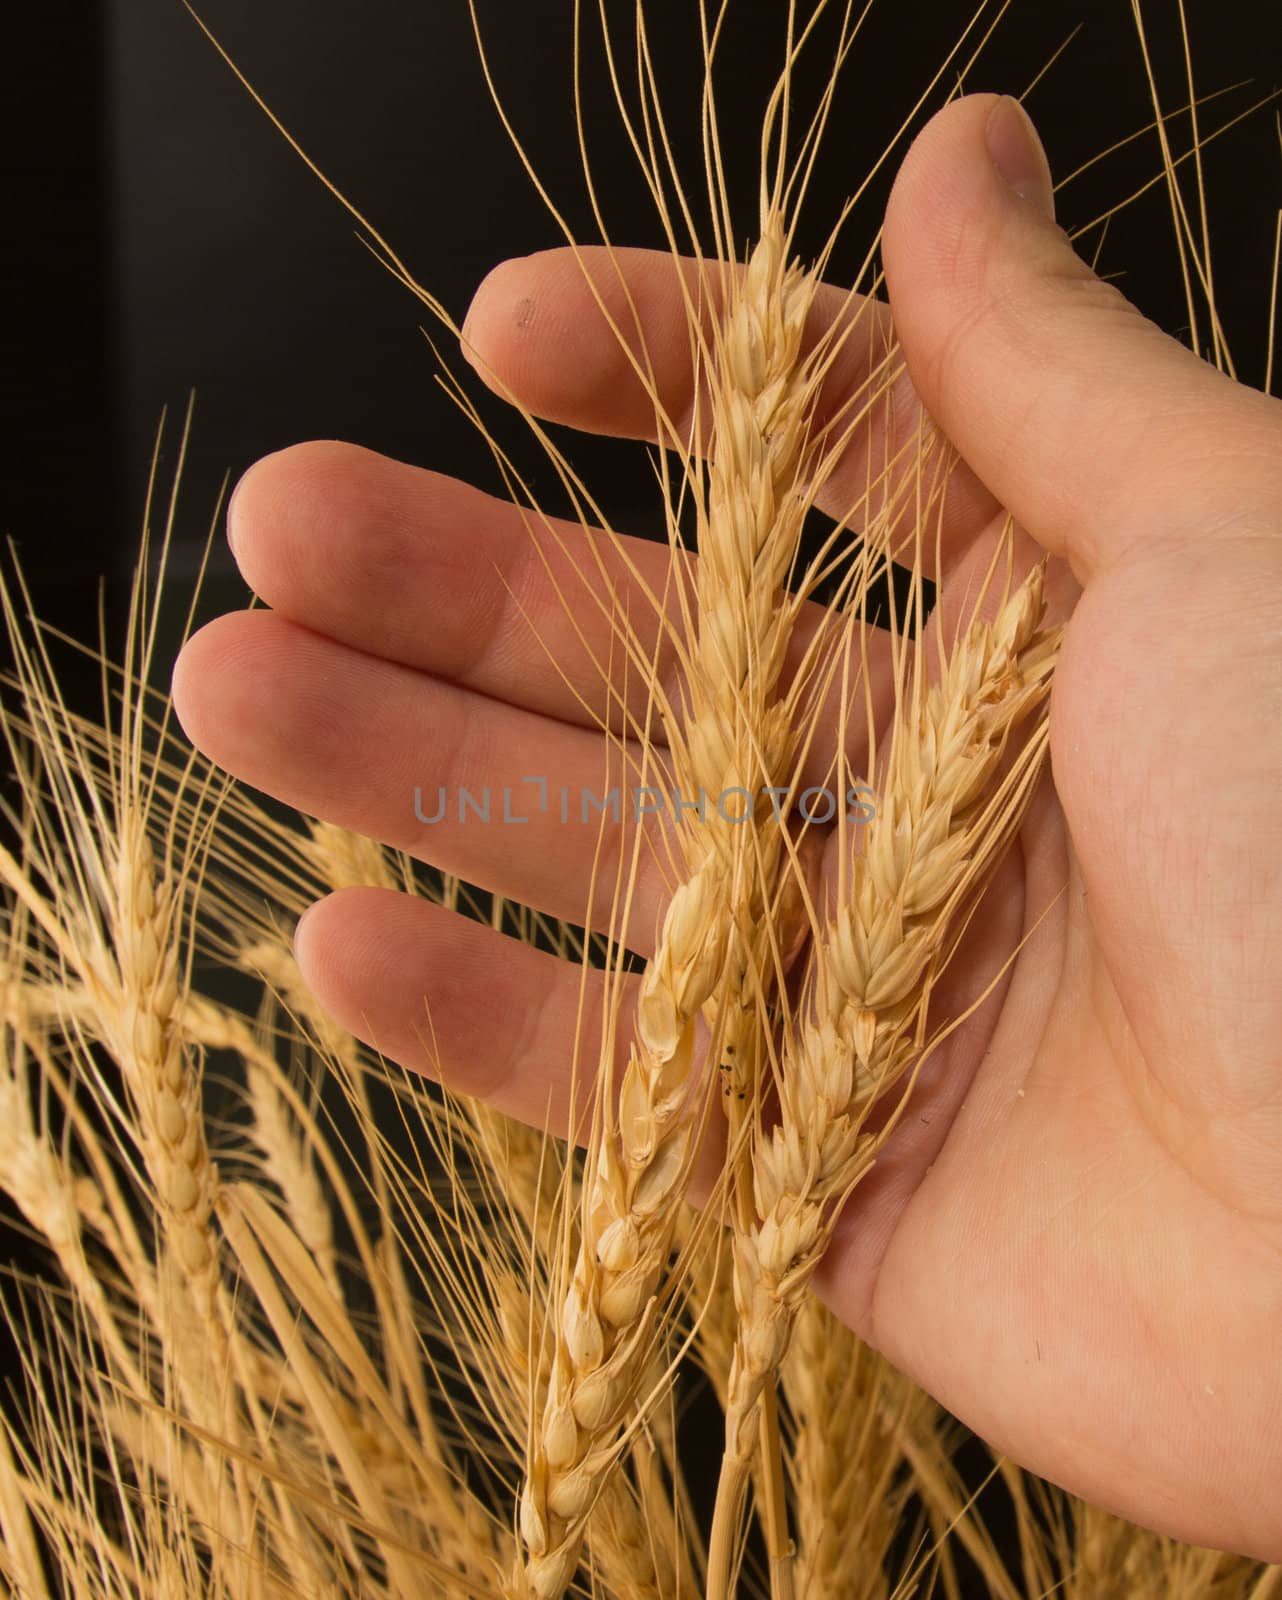 Wheat in a hand on a black background